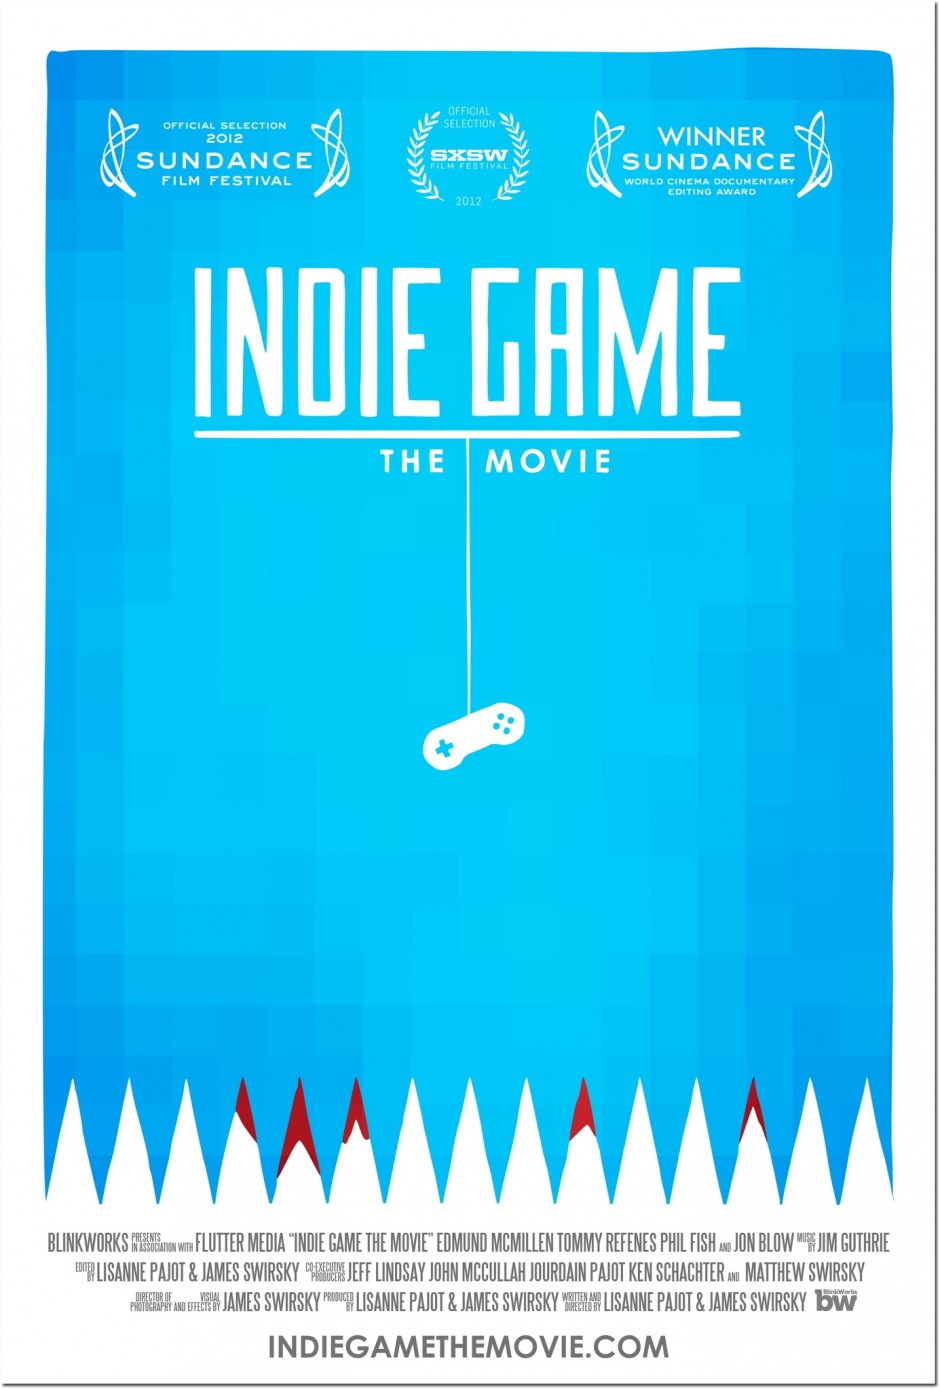 Indie-Game-The-Movie-2011-Movie-Poster-e1337878737382.jpeg